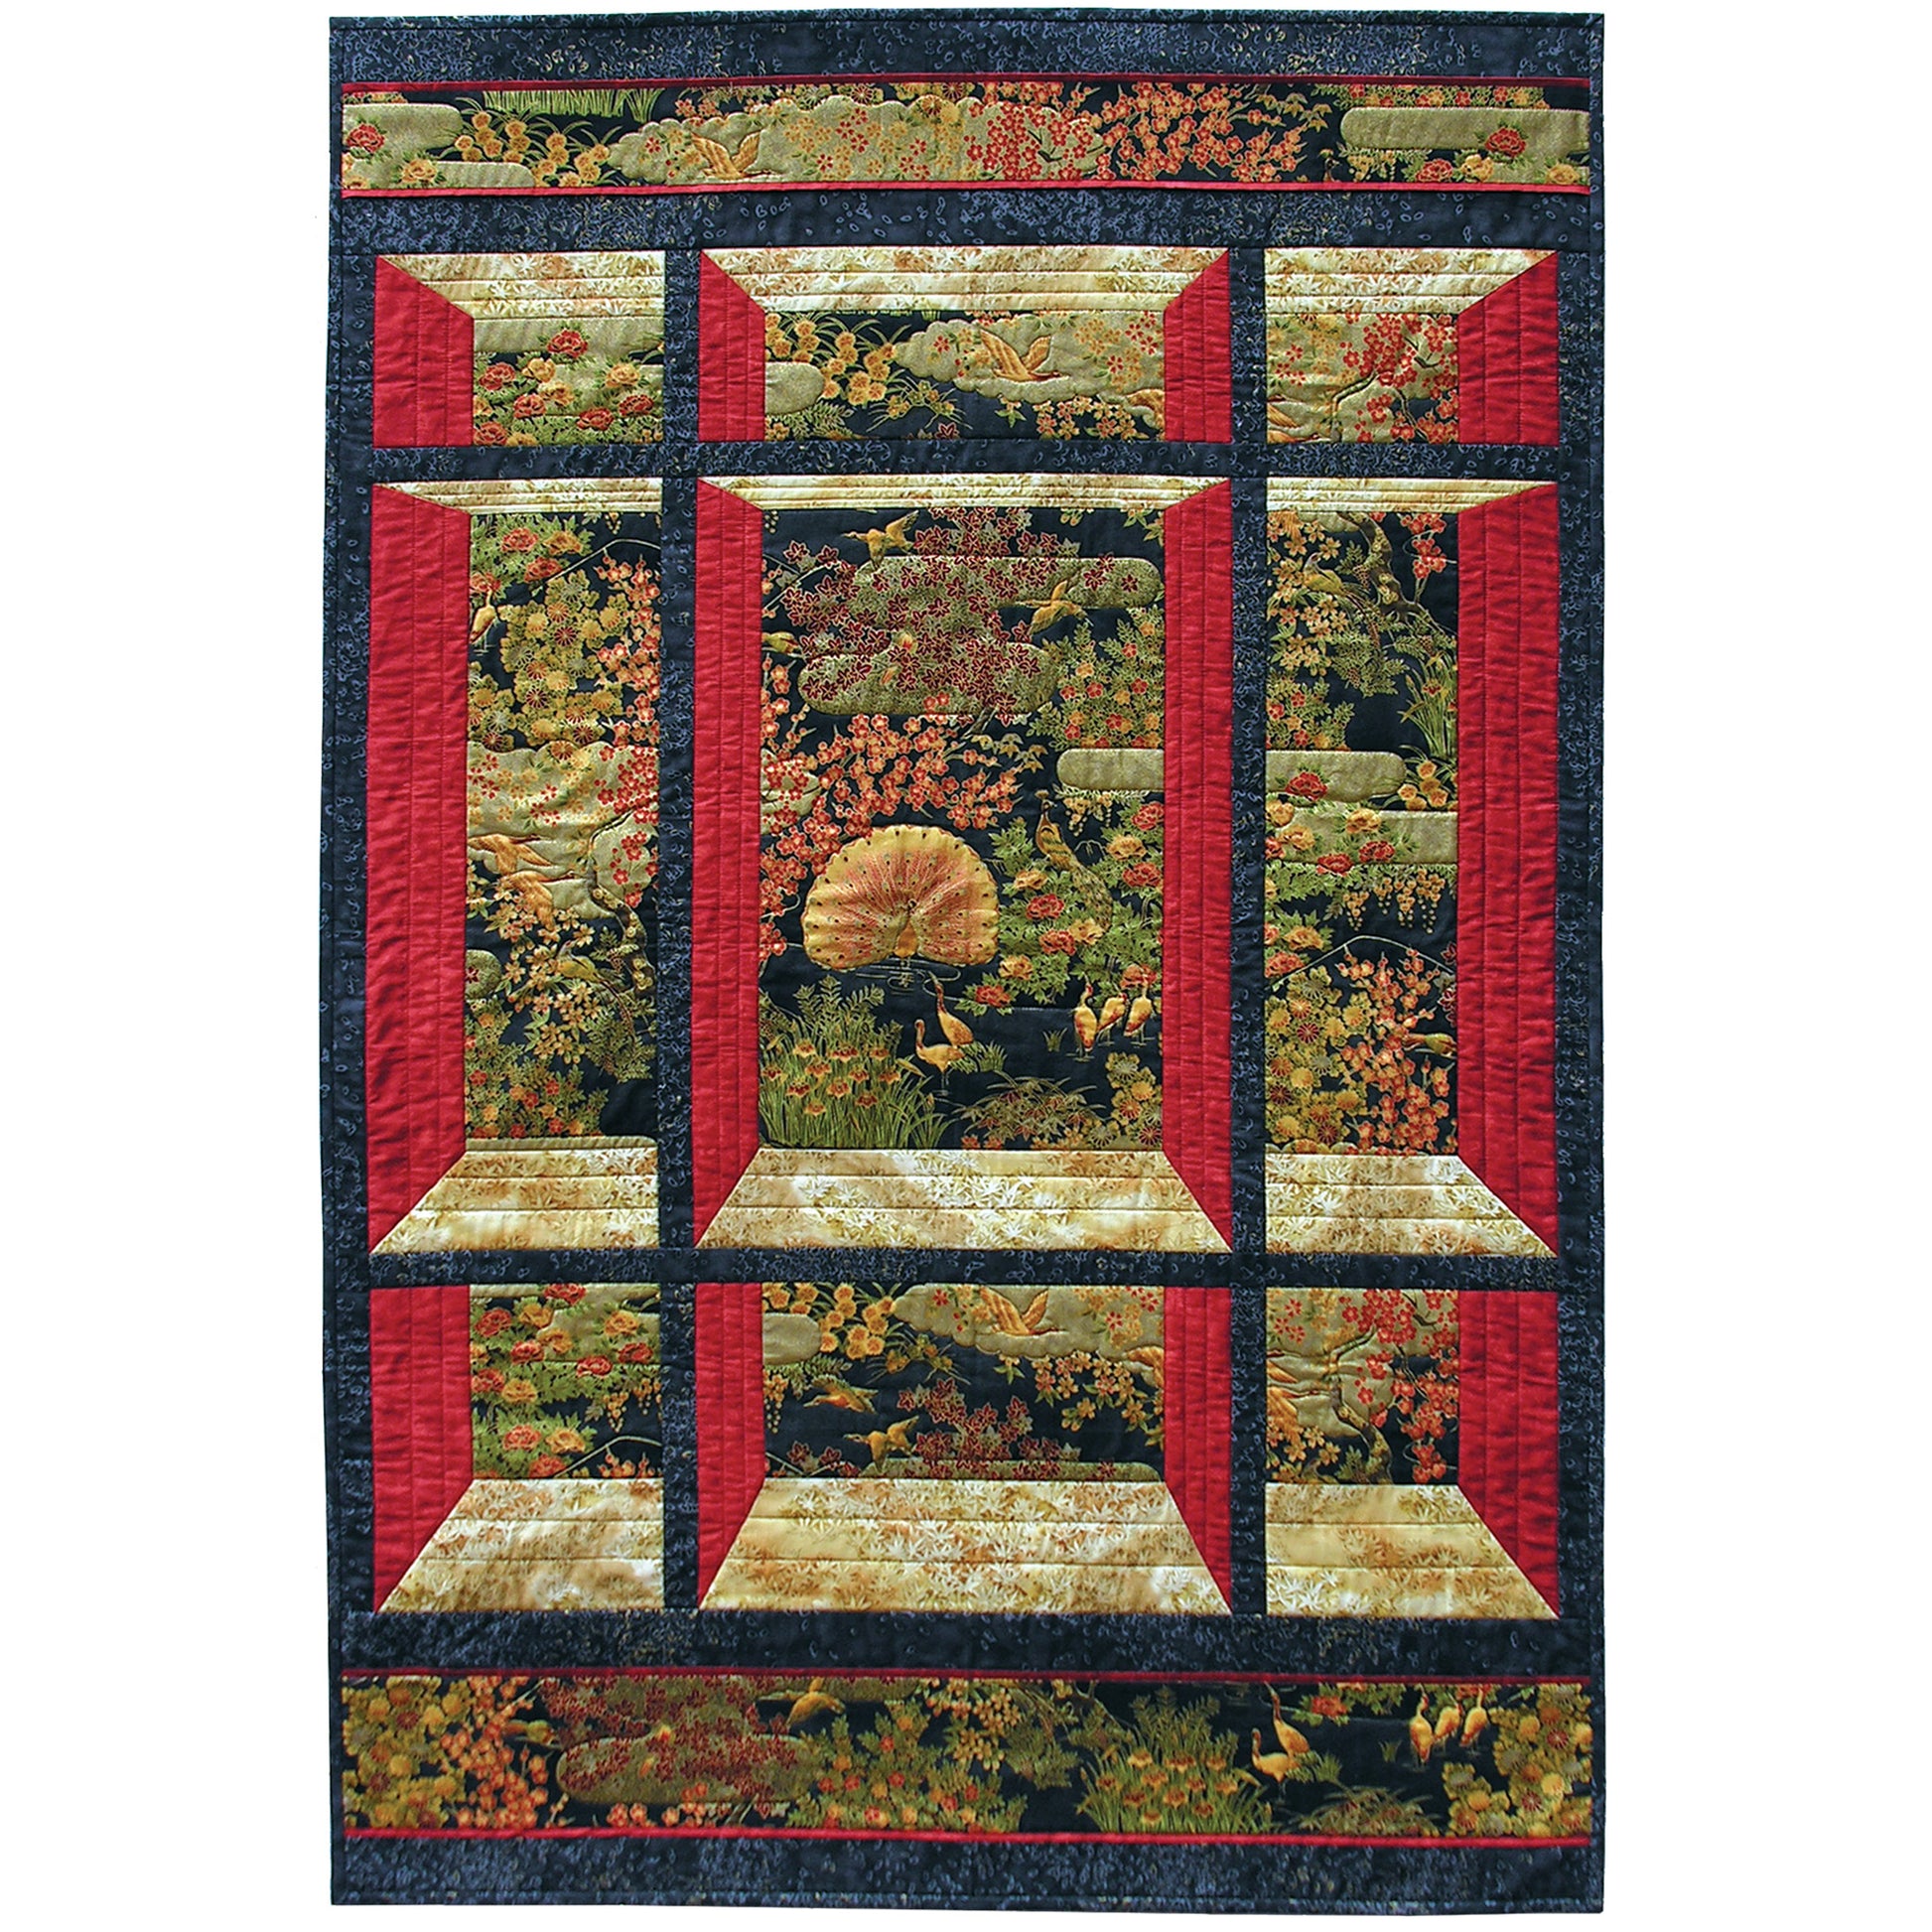 Quilt featuring a window design showing a Asian themed garden scene. Pattern designed for pre-printed panels or large scale fabrics.